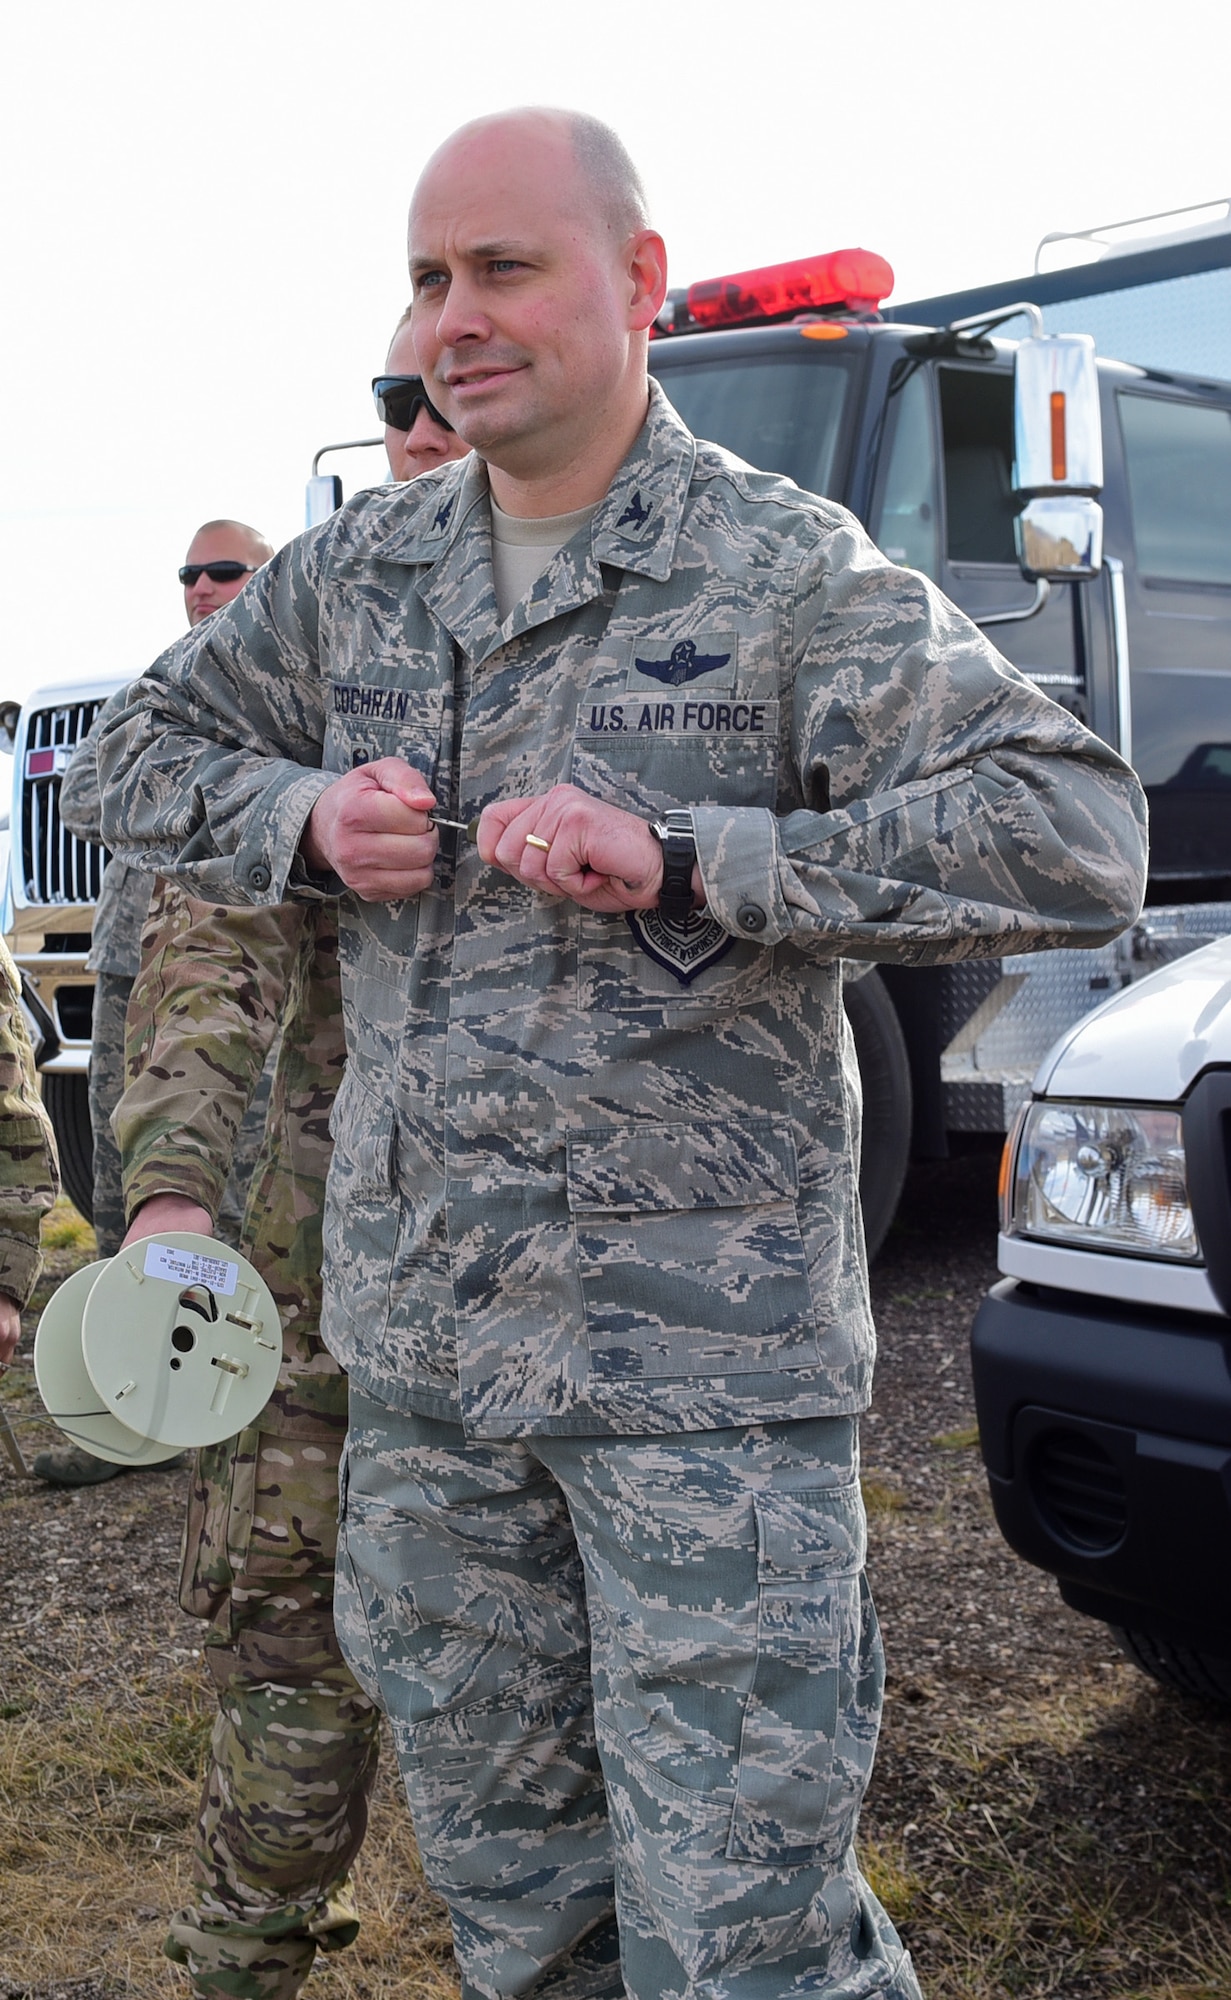 Col. Bradley Cochran, vice commander of the 28th Bomb Wing, pulls a pin to trigger an explosion at Ellsworth Air Force Base, S.D., Nov. 14, 2016. From a safe distance away, Cochran was given the opportunity to conduct a controlled explosion simulating expeditionary operations. (U.S. Air Force photo by Airman 1st Class James L. Miller)